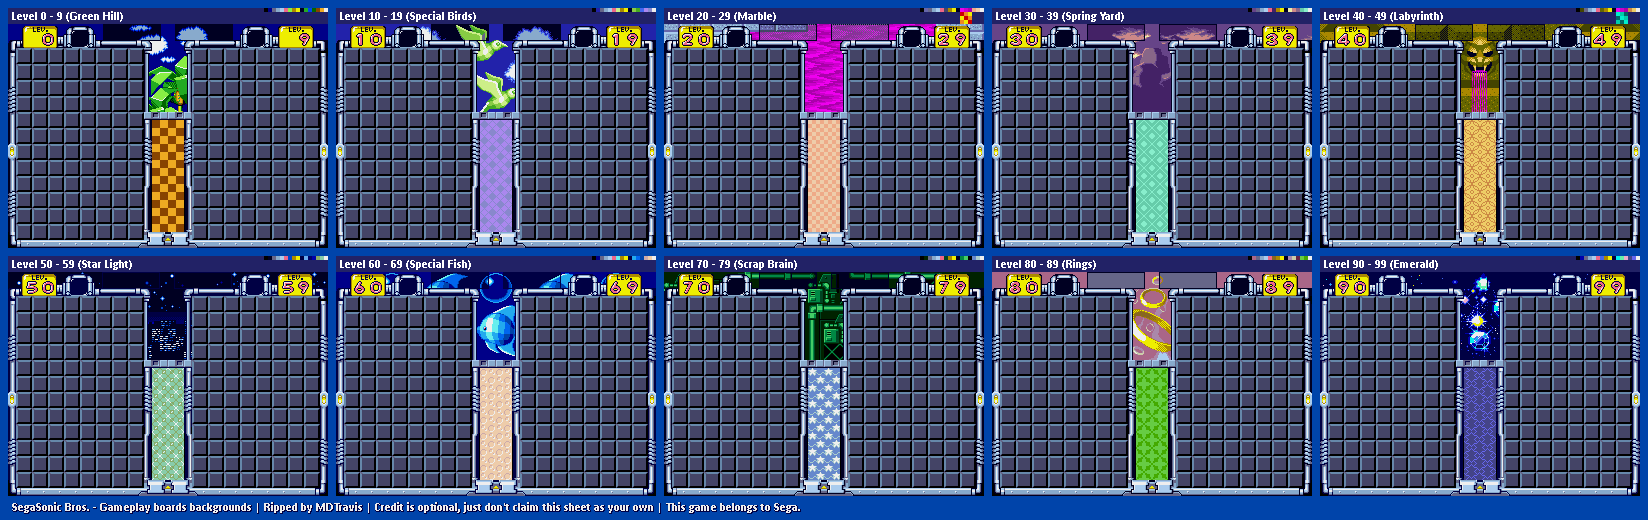 SegaSonic Bros. (Prototype) - Gameplay Boards and Backgrounds